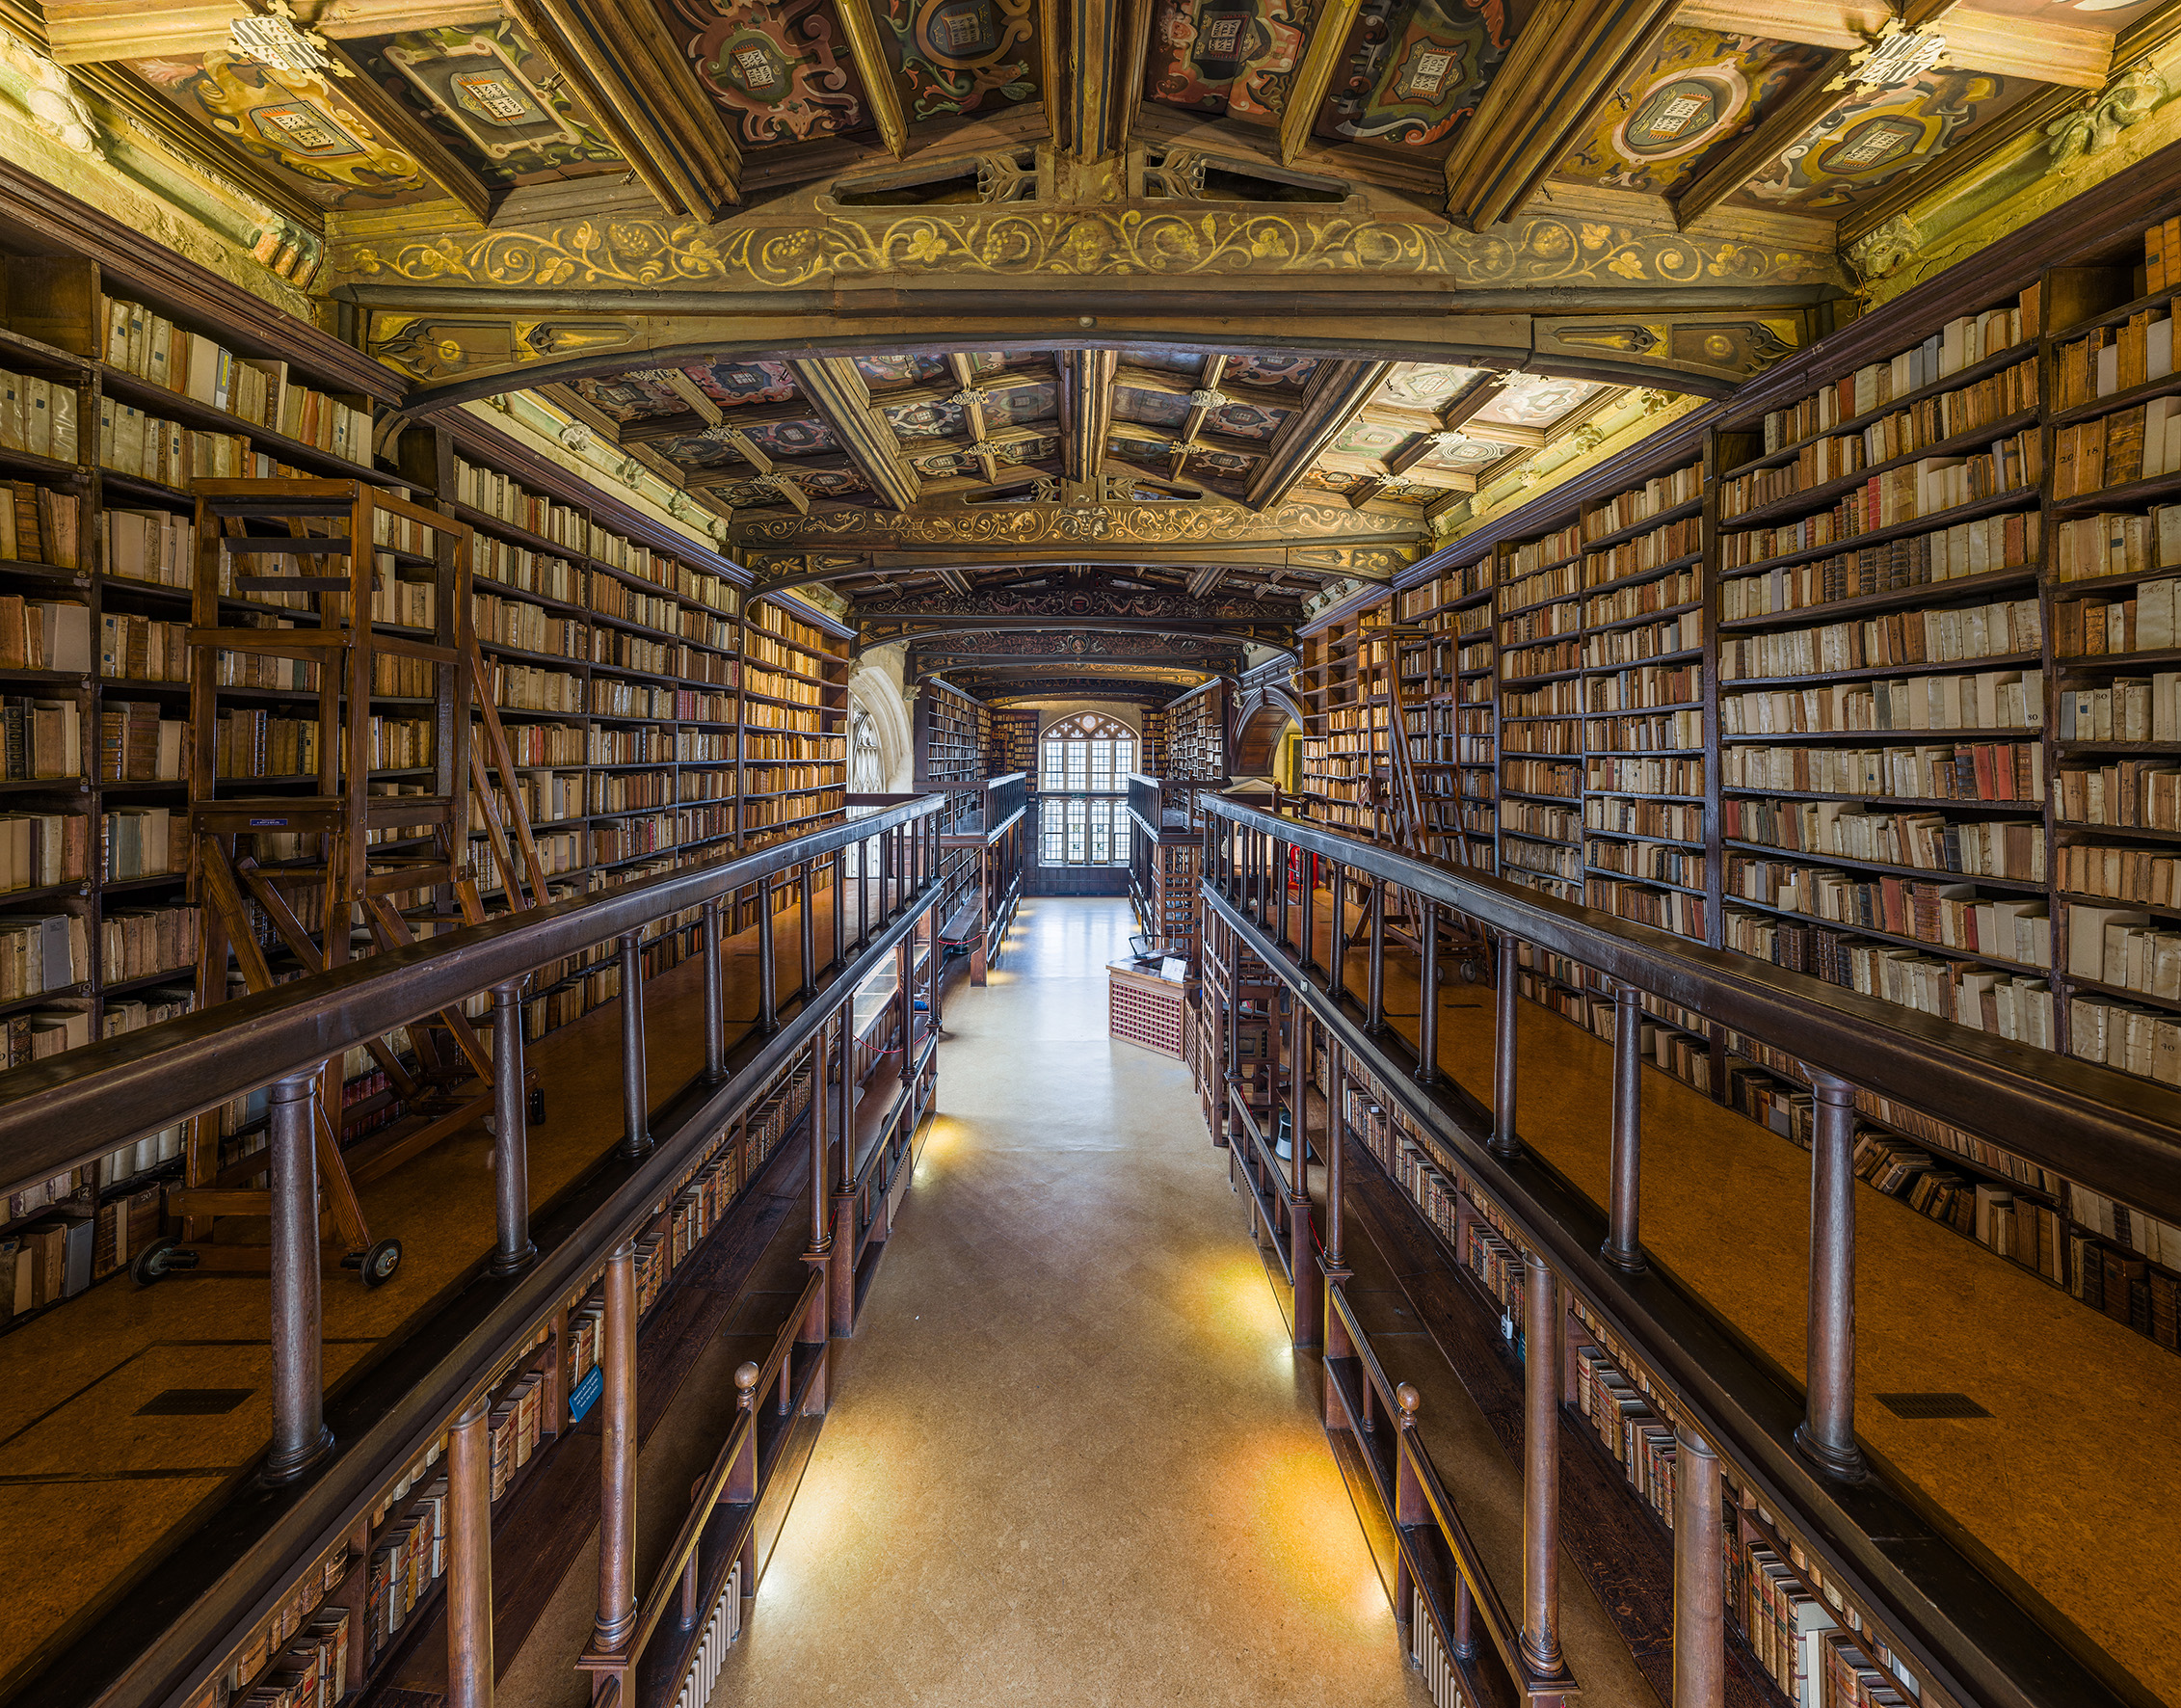 Stunning Pictures of the Oxford Library